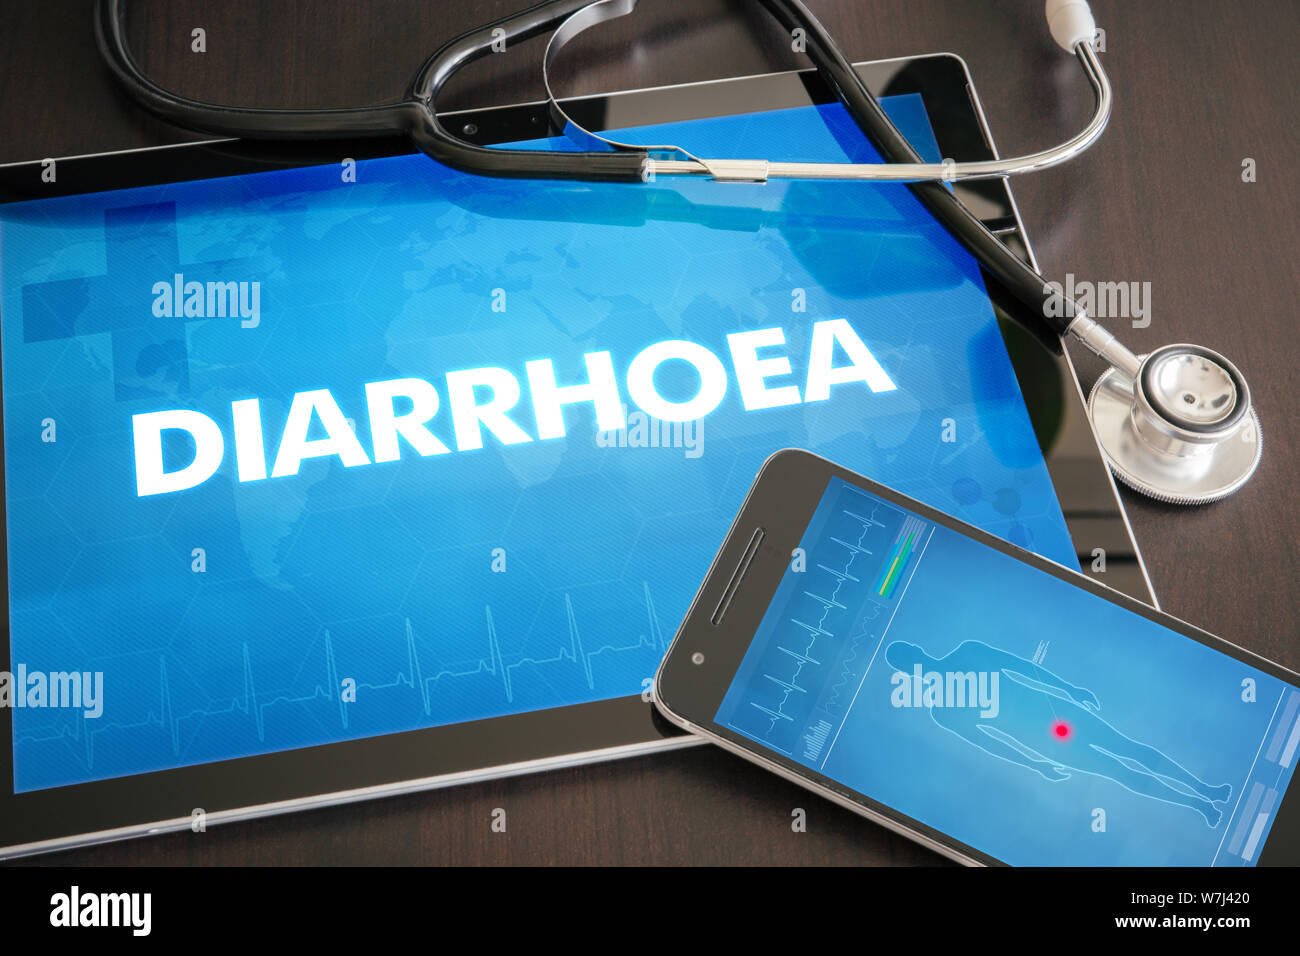 Diarrhoea (gastrointestinal disease related) diagnosis medical concept on tablet screen with stethoscope. Stock Photo